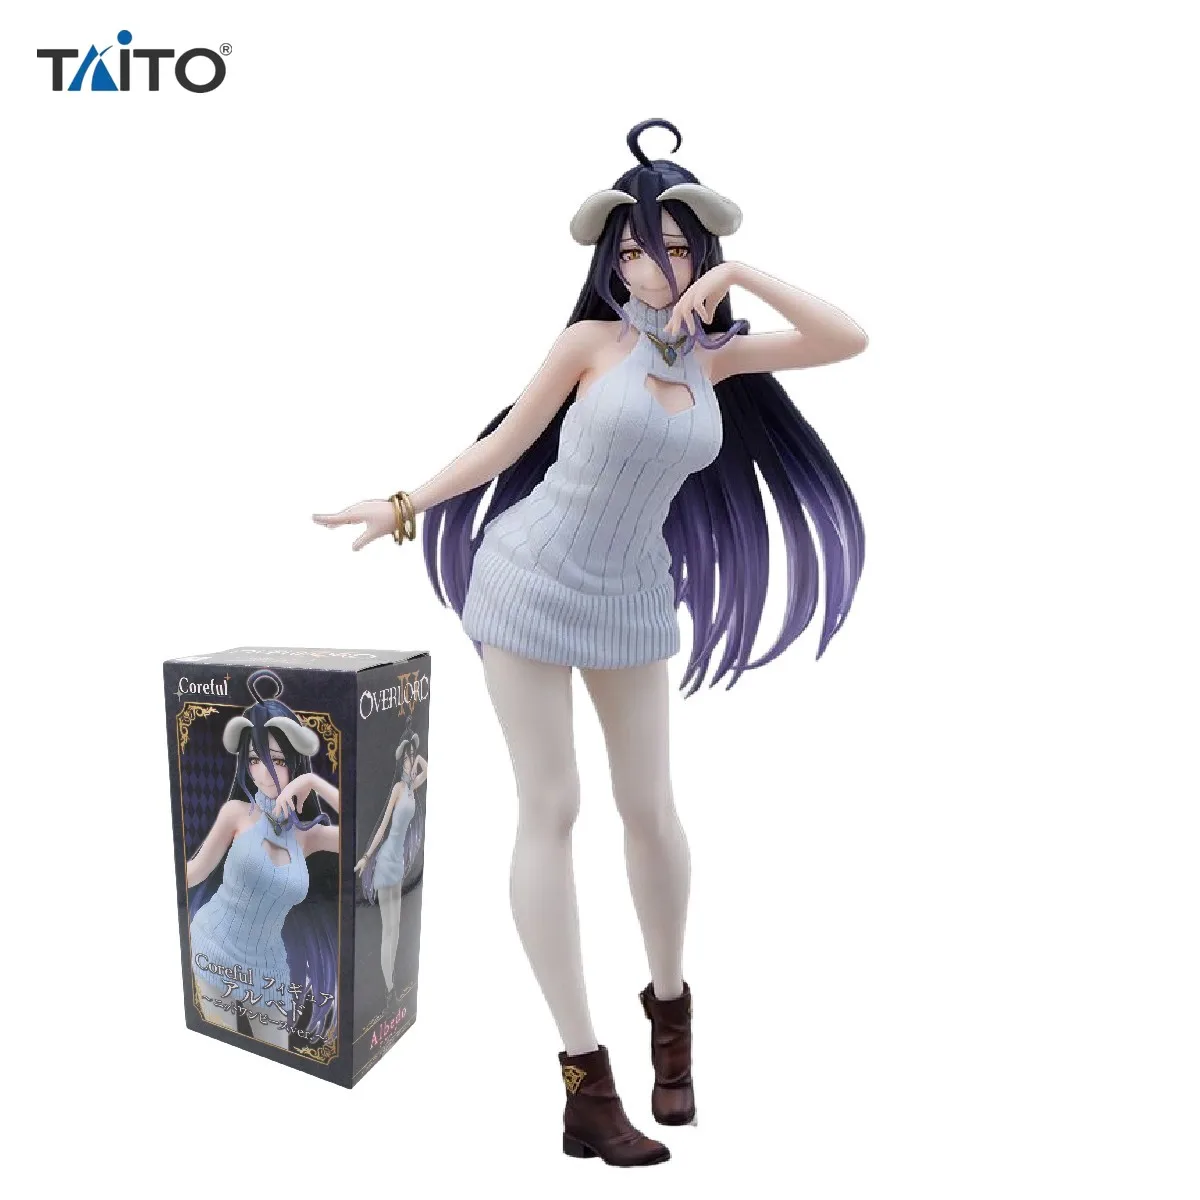 

TAITO Anime Figure Overlord Albedo Ainz Ooal Gown Knitted Skirt Finished Figure Car Decoration Model Gift